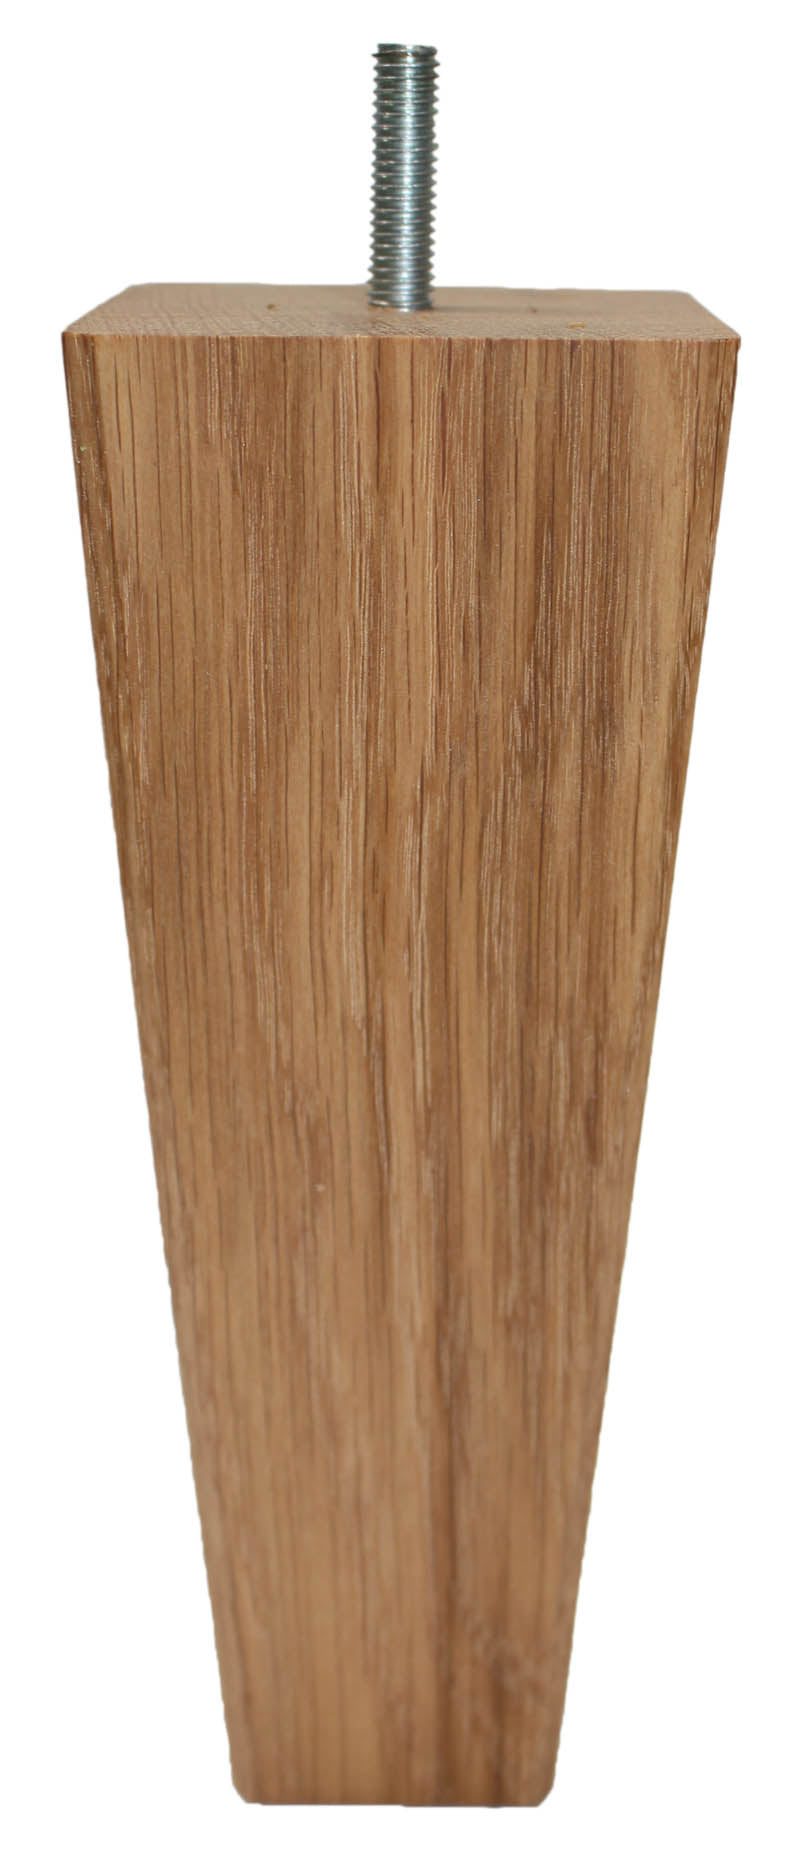 Olivia Solid Oak Square Tapered Wooden Furniture Legs